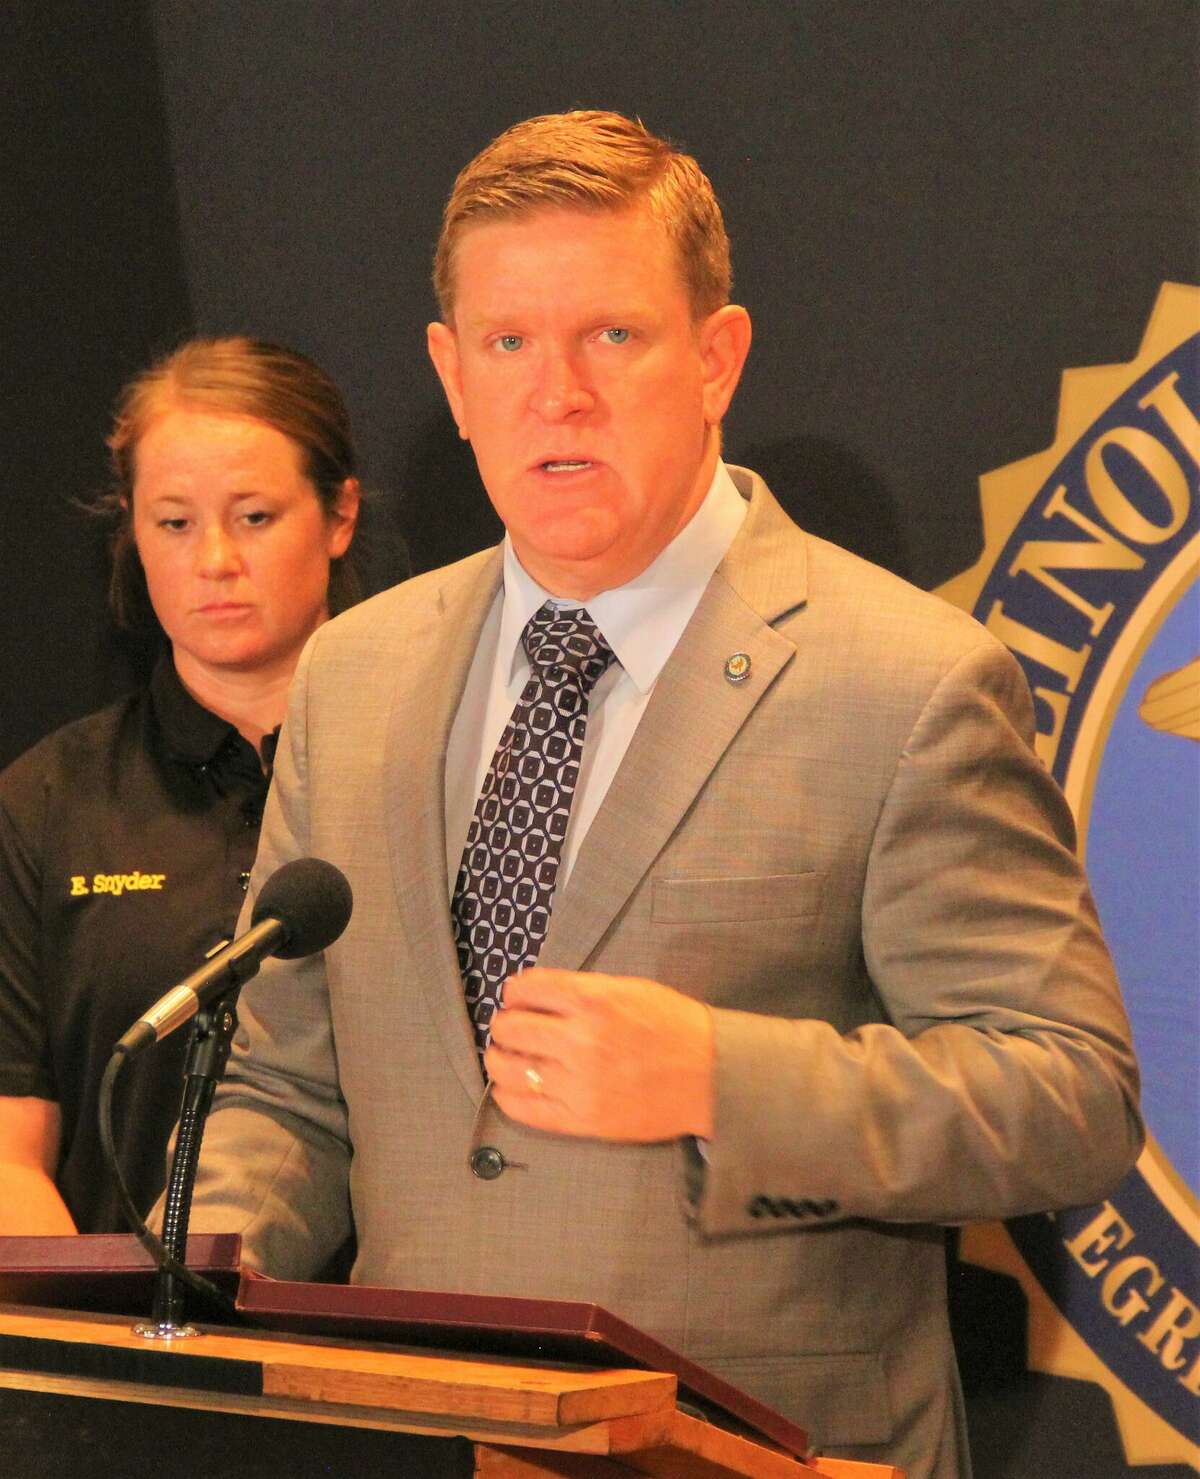 Illinois State Police Director Brendan F. Kelly talks to the media about recent firearm enforcement details held across the state during a visit to the ISP regional headquarters in Collinsville.